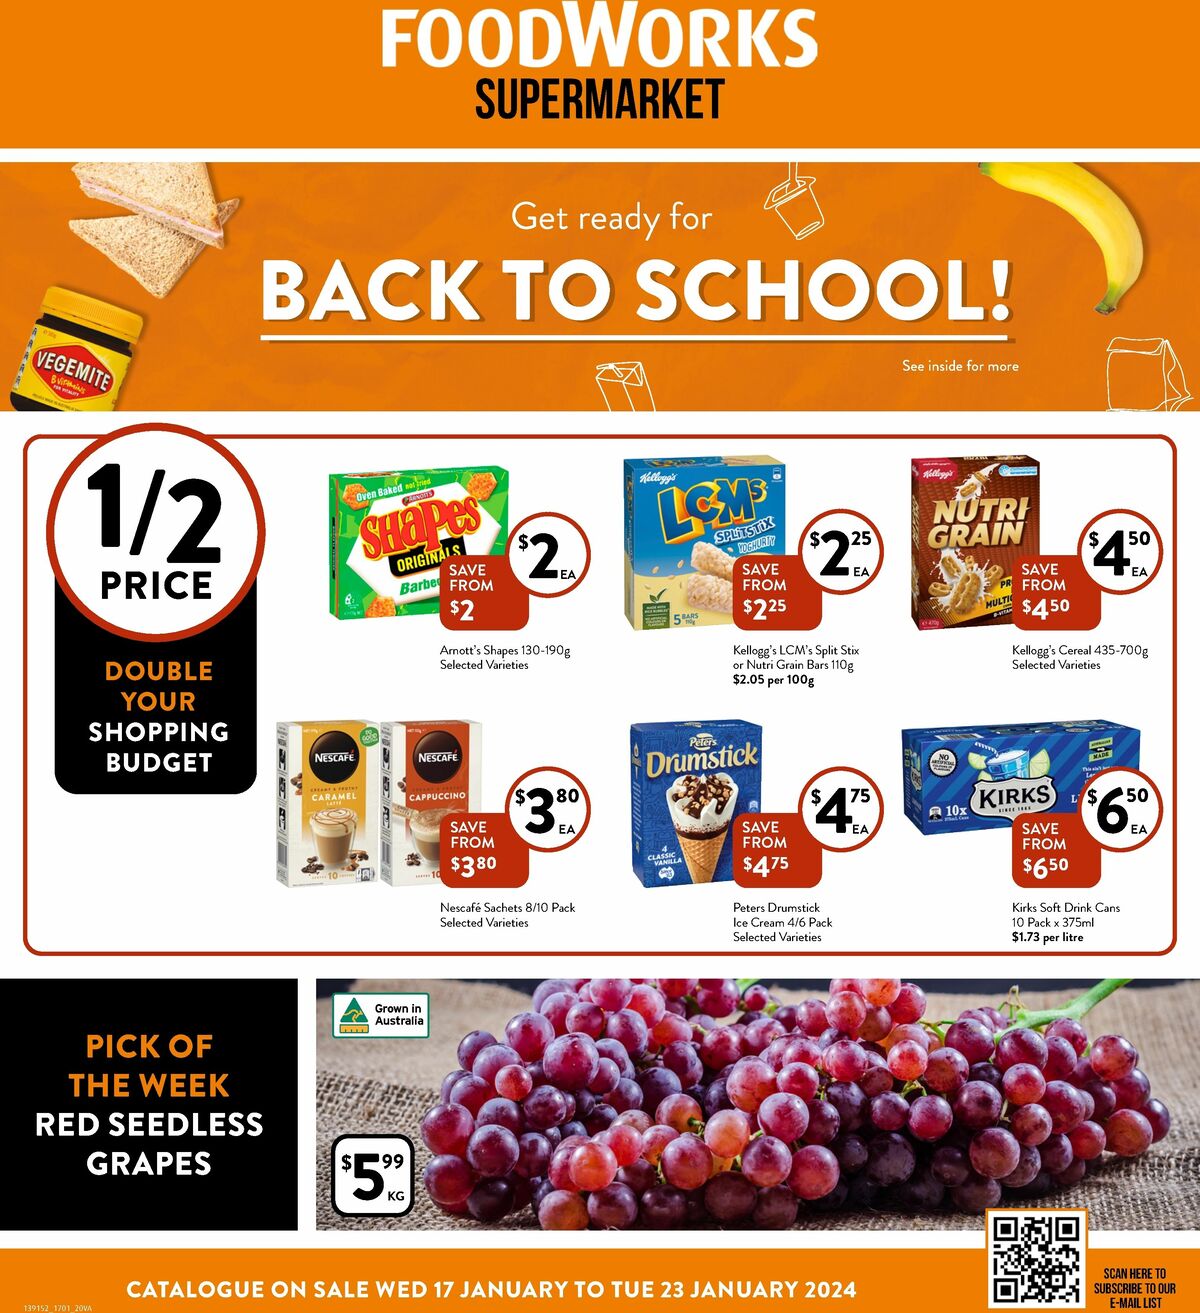 FoodWorks Supermarket Catalogues from 17 January